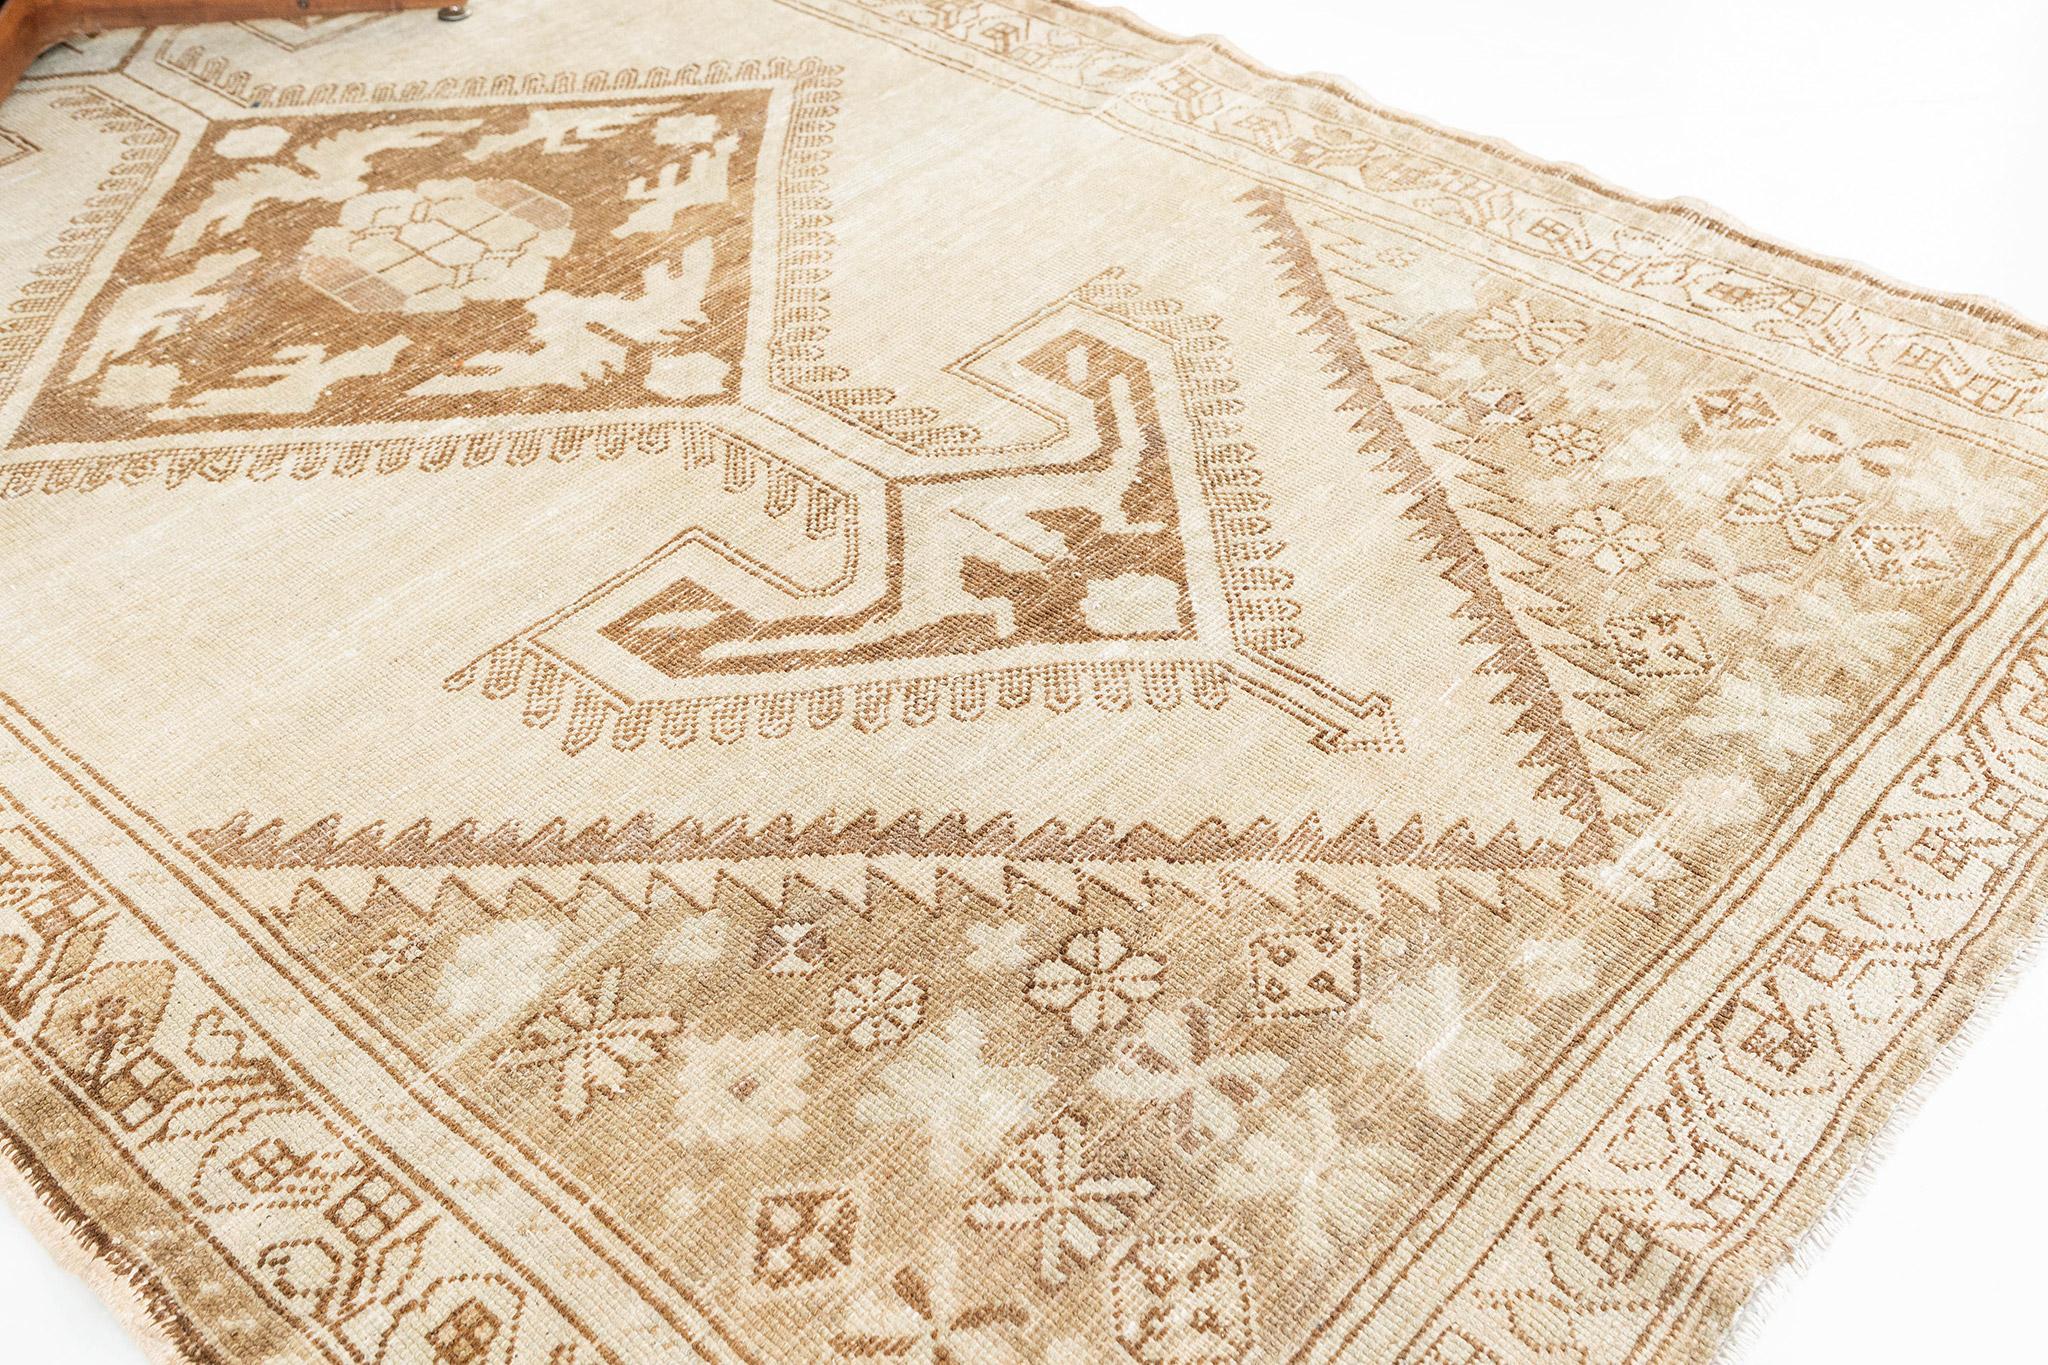 A Vintage Turkish Anatolian rug that is poised to impress. Characterized by predominantly tribal style with its ornate botanical details and muted colour scheme, this elaborate design creates a mesmerizing sense of well-balanced proportions. Taking